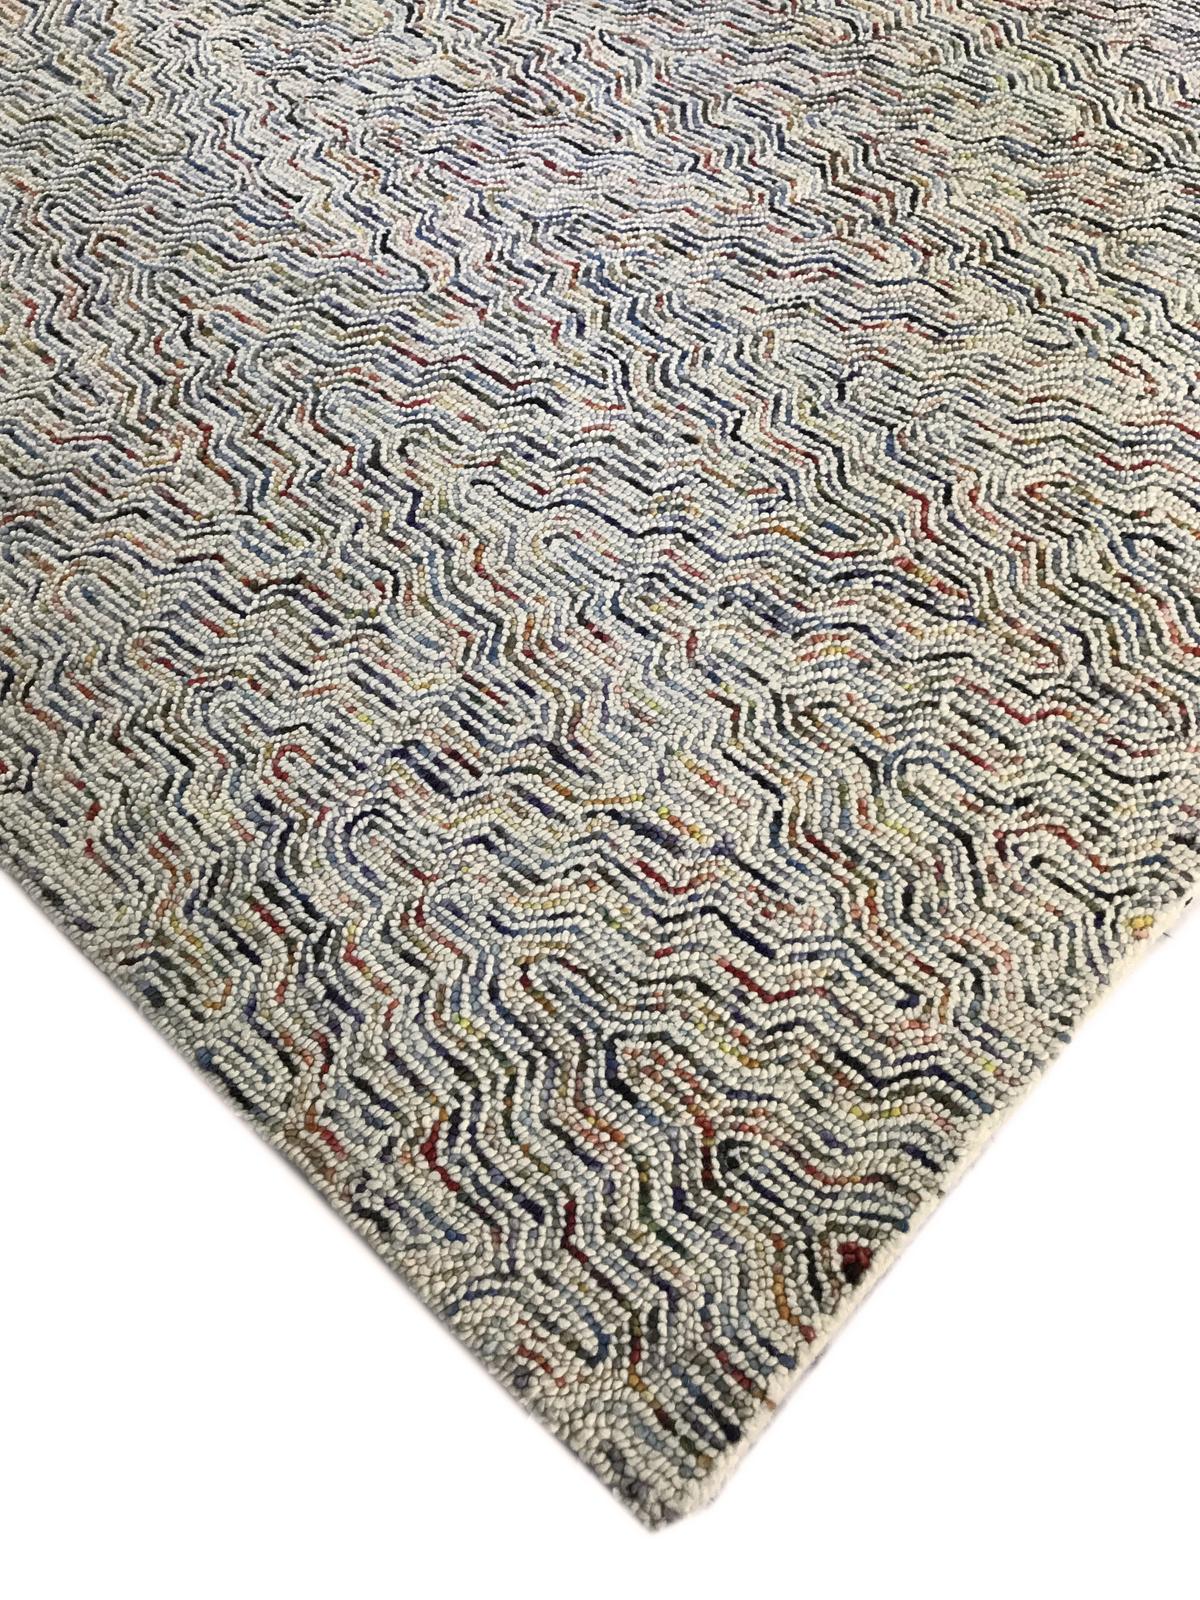 Tufted Multi-Color Indian Wool Area Rug For Sale 5